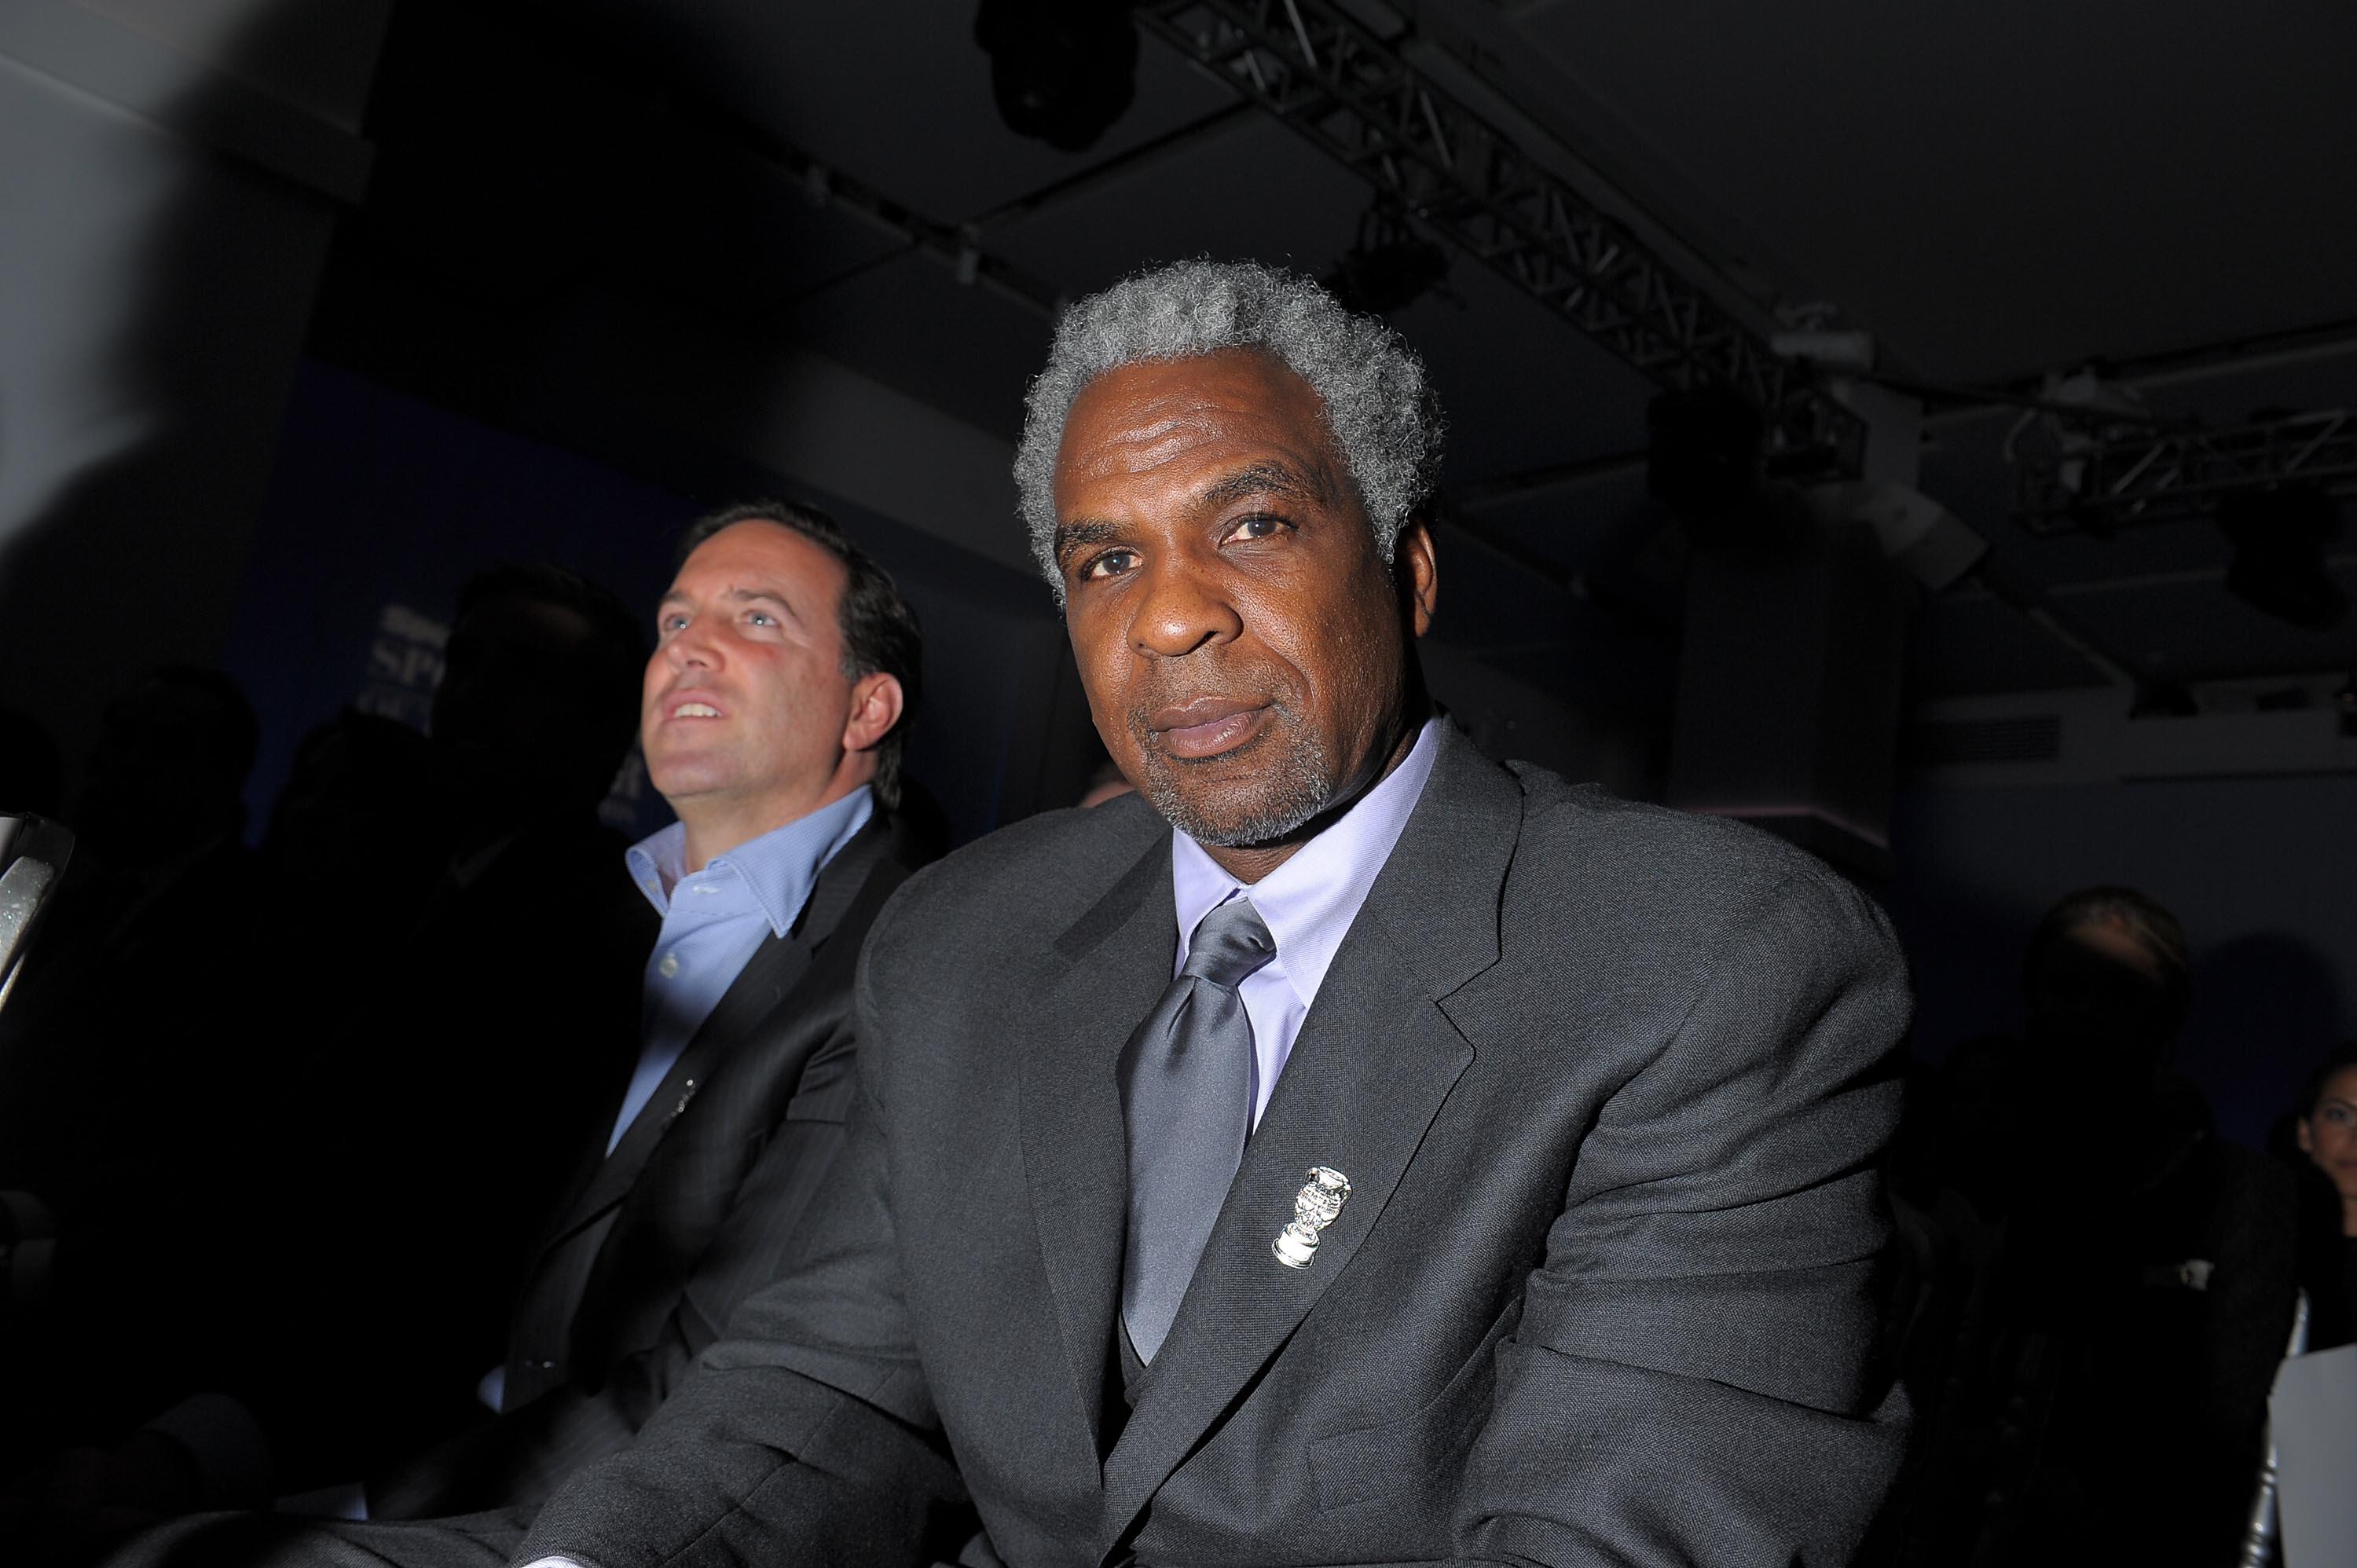 NEW YORK, NY - DECEMBER 05: Former professional basketball player Charles Oakley attends the 2012 Sports Illustrated Sportsman of the Year award presentation at Espace on December 5, 2012 in New York City.  (Photo by Michael Loccisano/Getty Images)